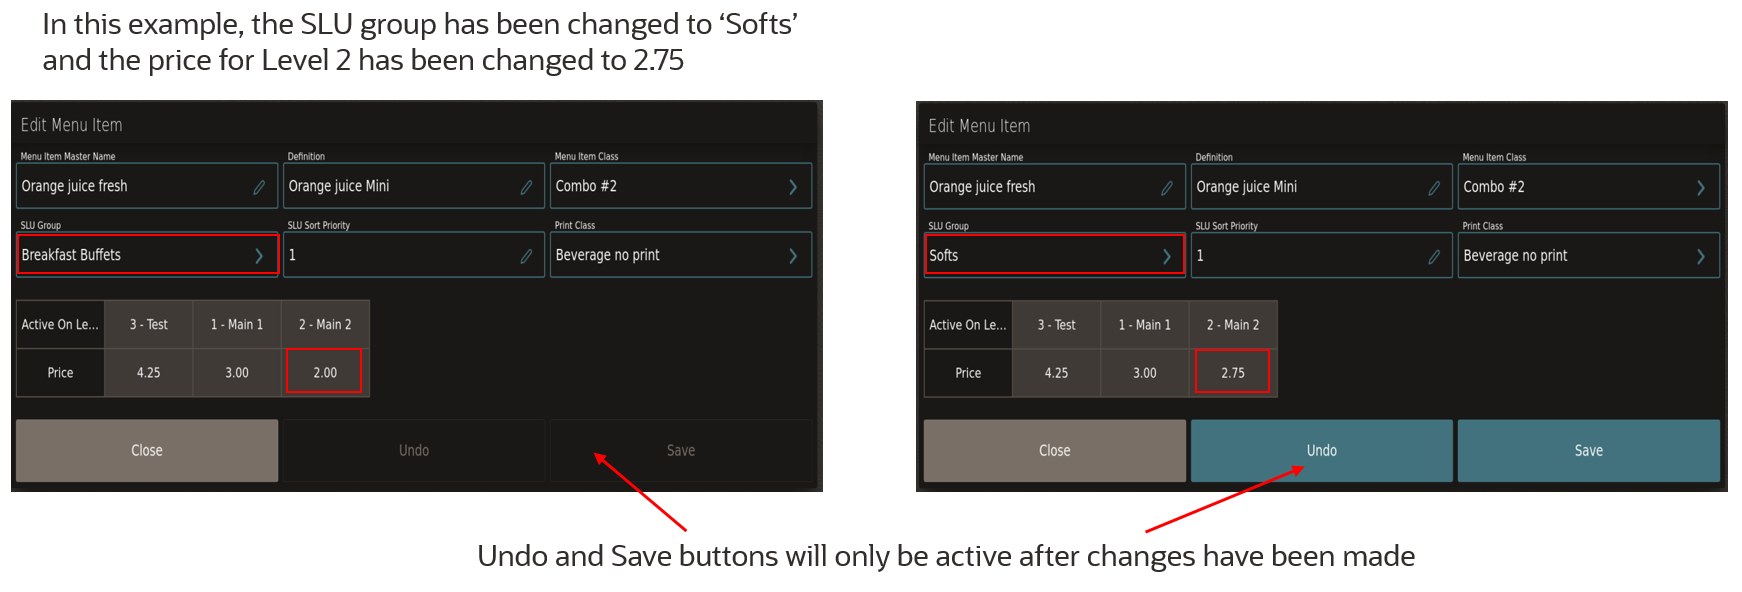 This figure shows the Edit Menu Item dialog with changes made to the SLU Group and Price. This figure also uses red arrows to indicate the Undo and Save buttons.